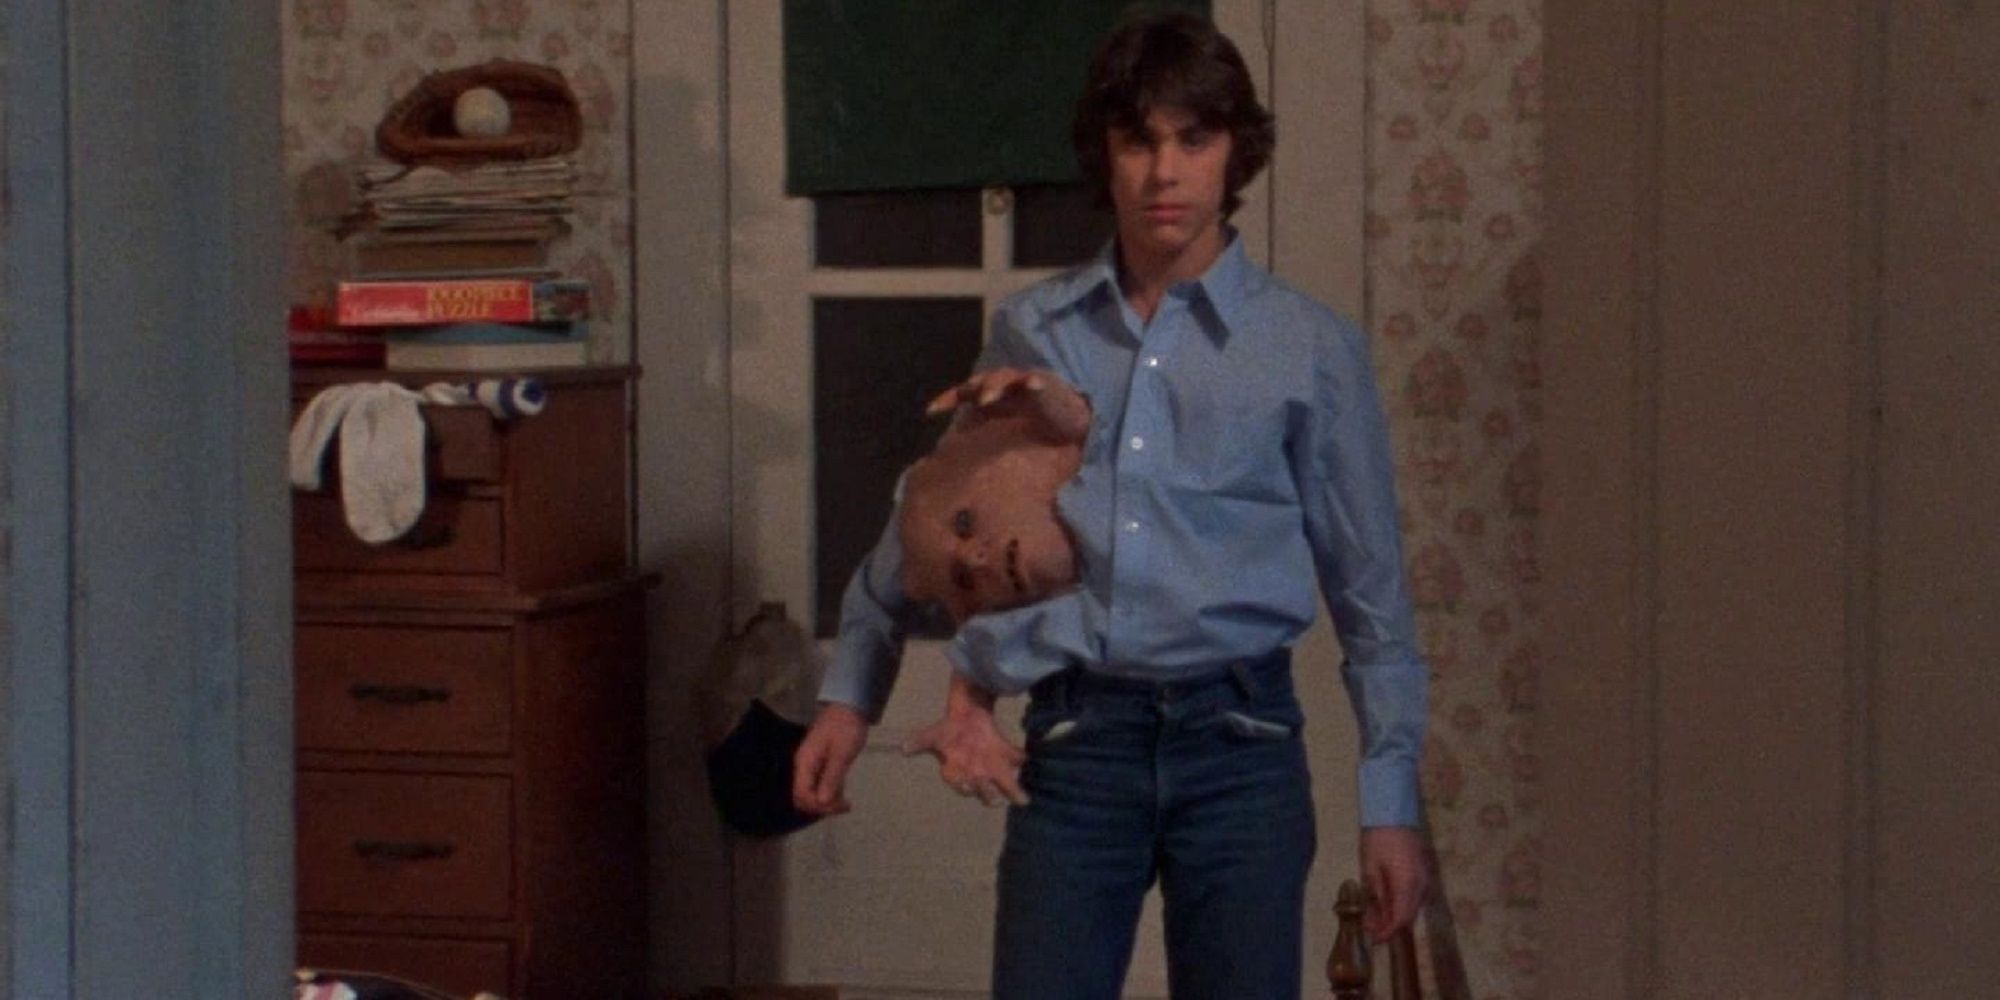 Duane holding Belial in his shirt in 'Basket Case.'